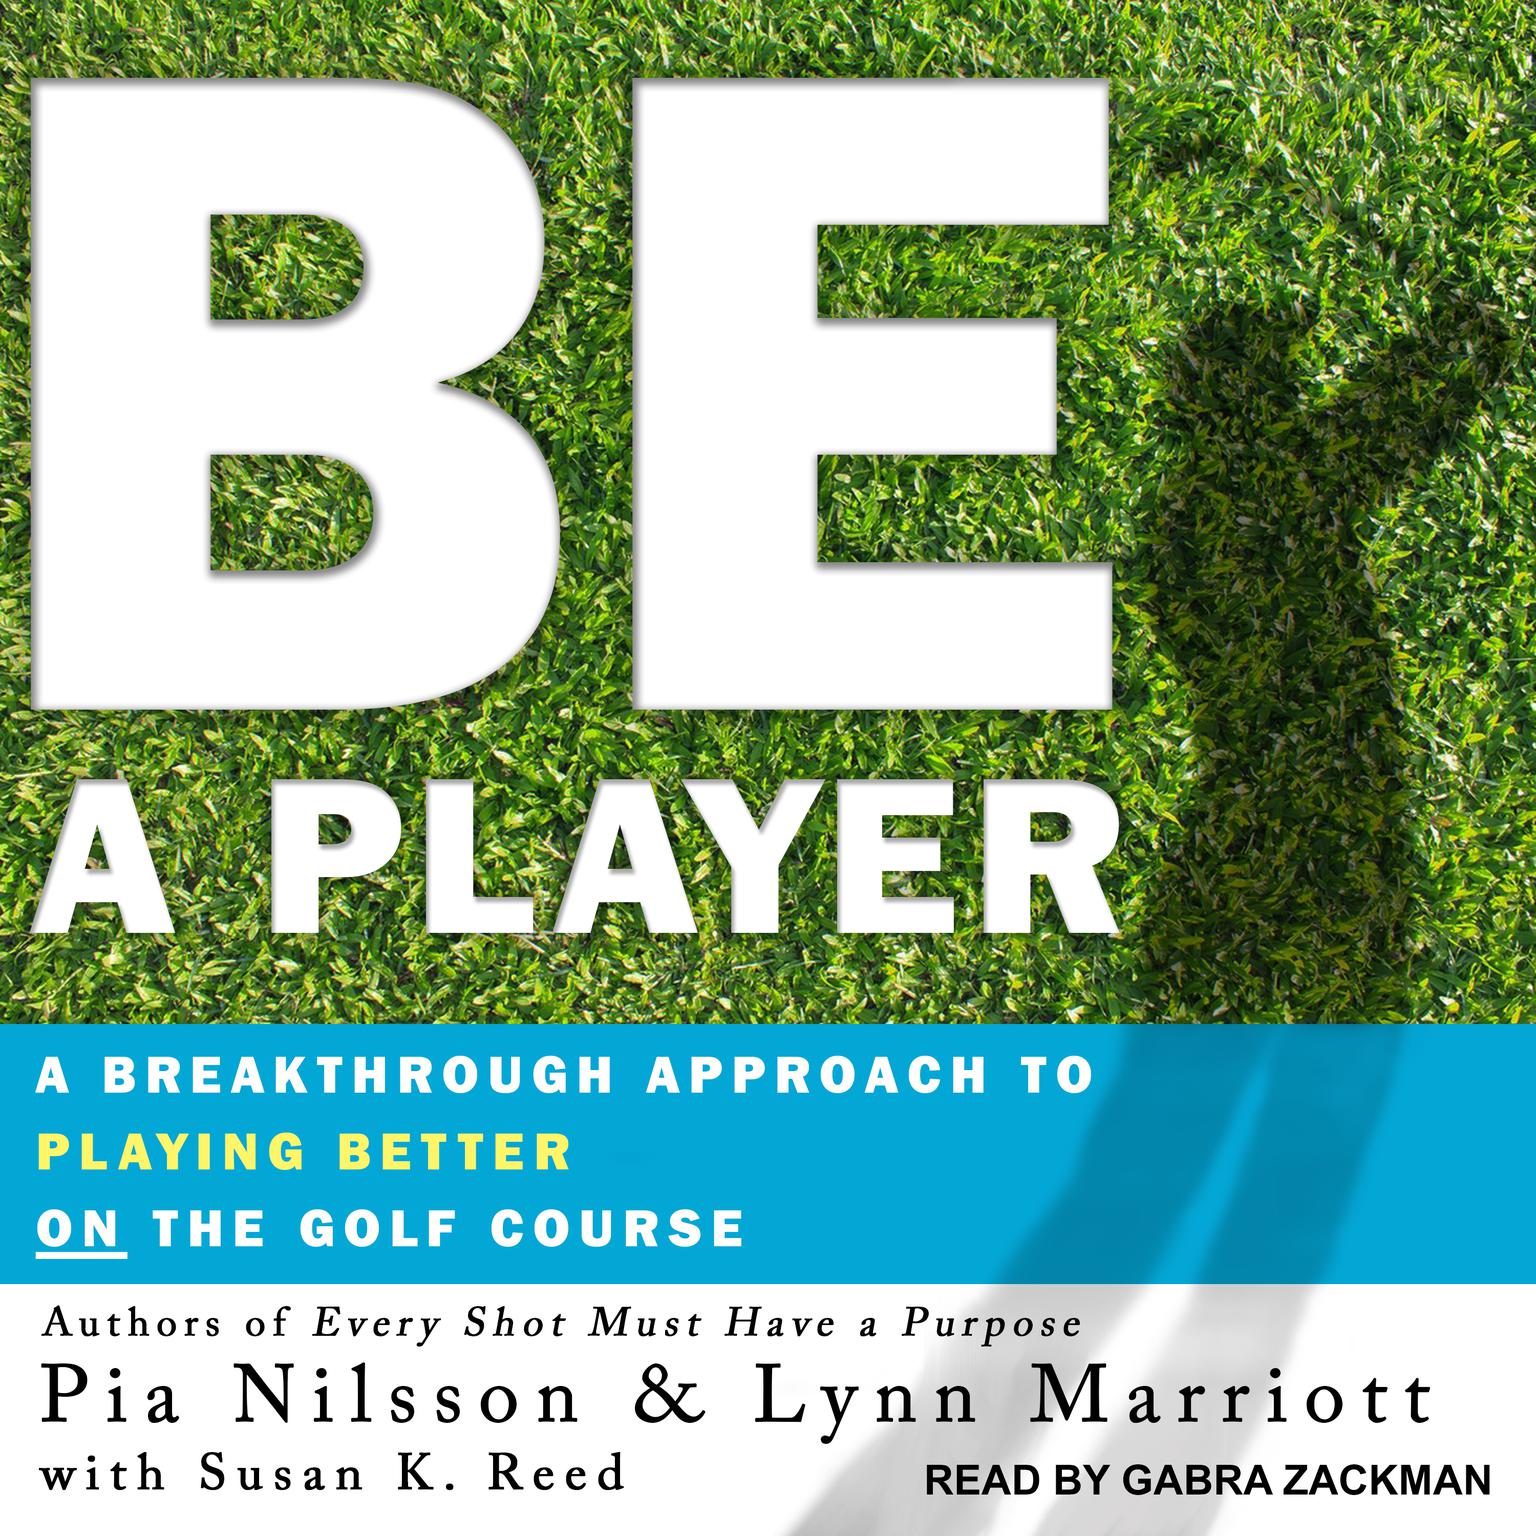 Be a Player: A Breakthrough Approach to Playing Better ON the Golf Course Audiobook, by Pia Nilsson